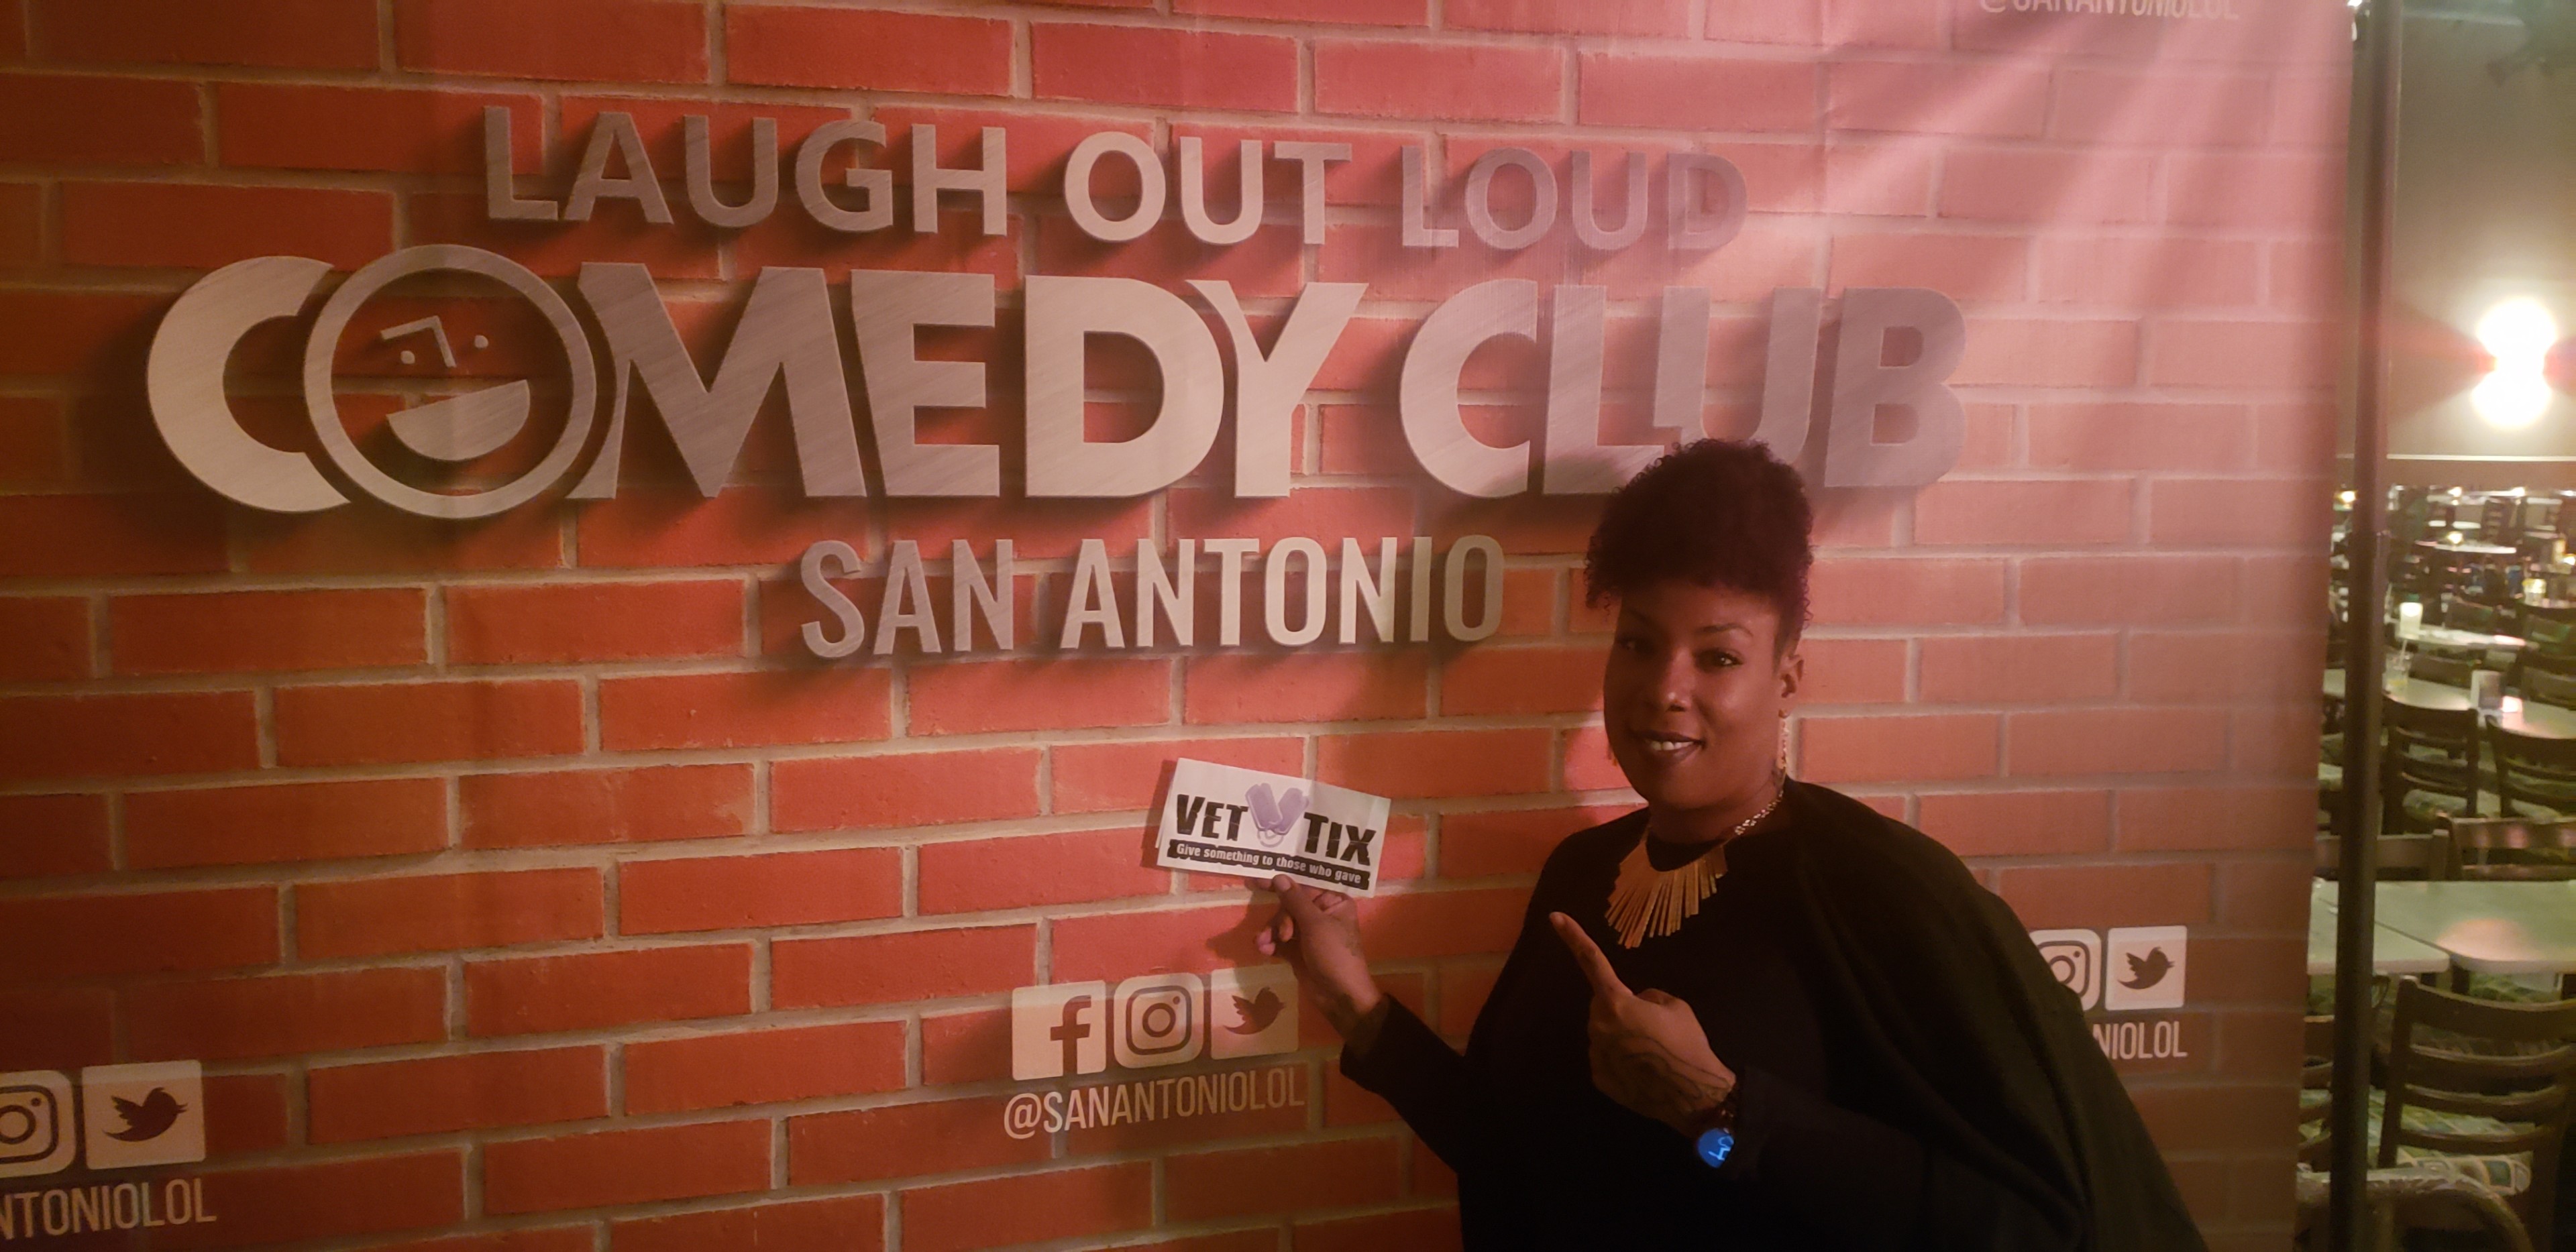 Drag Out Loud in San Antonio at Laugh Out Loud Comedy Club